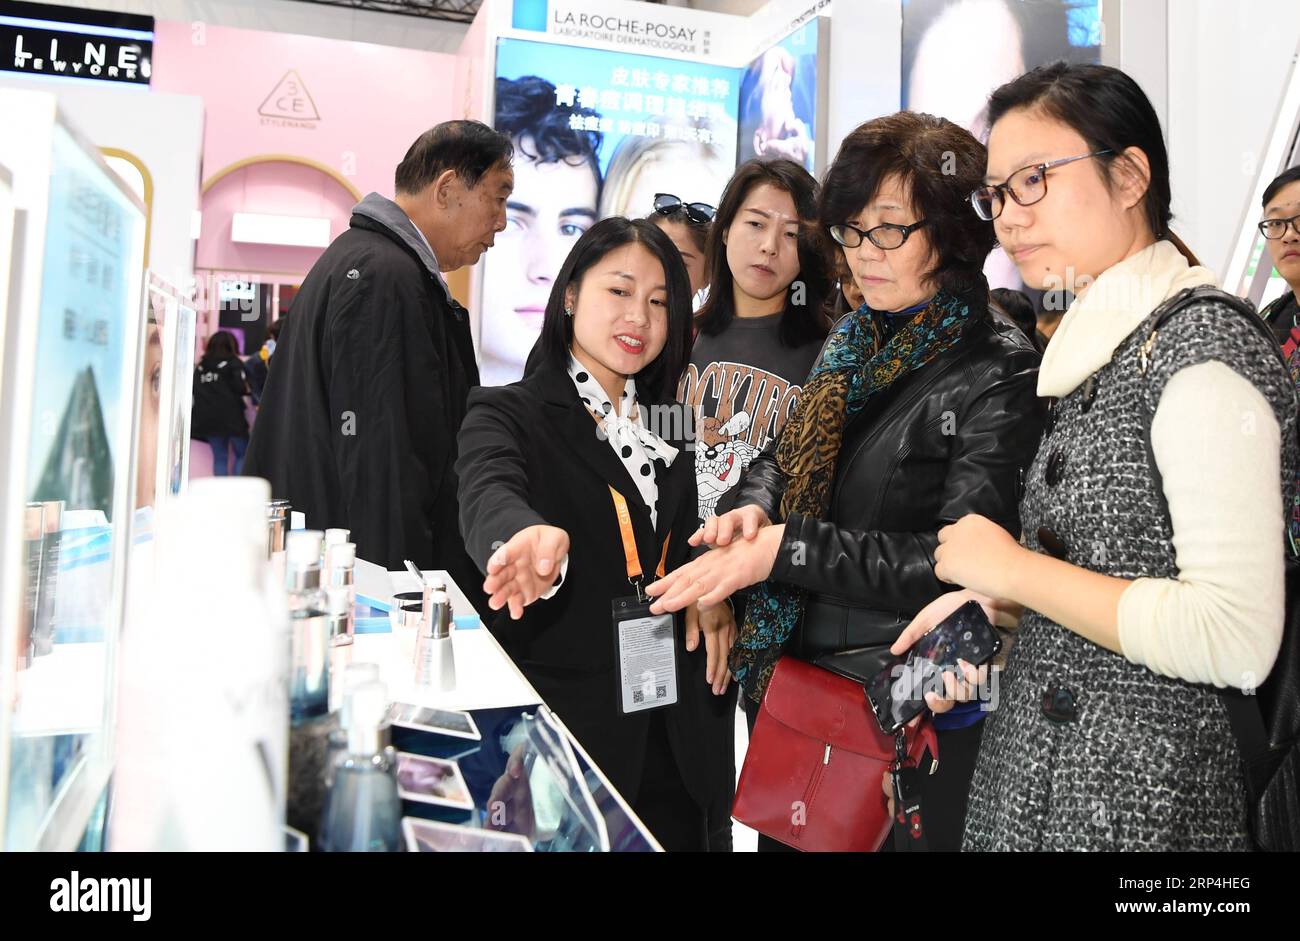 (181109) -- SHANGHAI, Nov. 9, 2018 -- People visit the Apparel, Accessories & Consumer Goods area of the first China International Import Expo (CIIE) in Shanghai, east China, Nov. 9, 2018. The CIIE is opened to group visitors from Nov. 9 to Nov. 10. ) (IMPORT EXPO)CHINA-SHANGHAI-CIIE-GROUP VISITORS (CN) Sadat PUBLICATIONxNOTxINxCHN Stock Photo